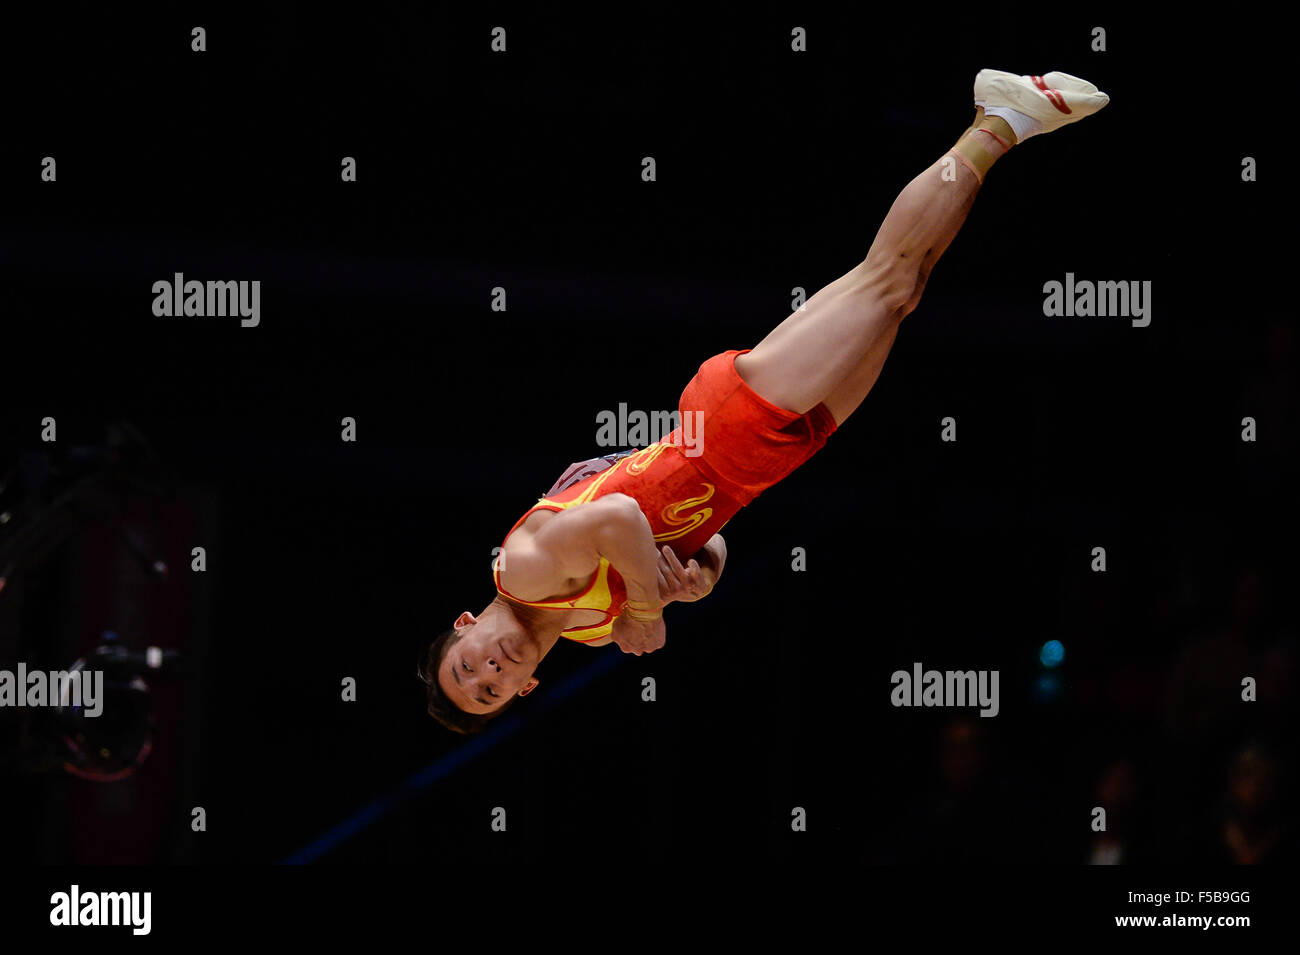 Glasgow, UK. 30th Oct, 2015. RUOTENG XIAO competes on the floor during the men's All-Around Finals of the 2015 World Gymnastics Championships held in Glasgow, United Kingdom. © Amy Sanderson/ZUMA Wire/Alamy Live News Stock Photo